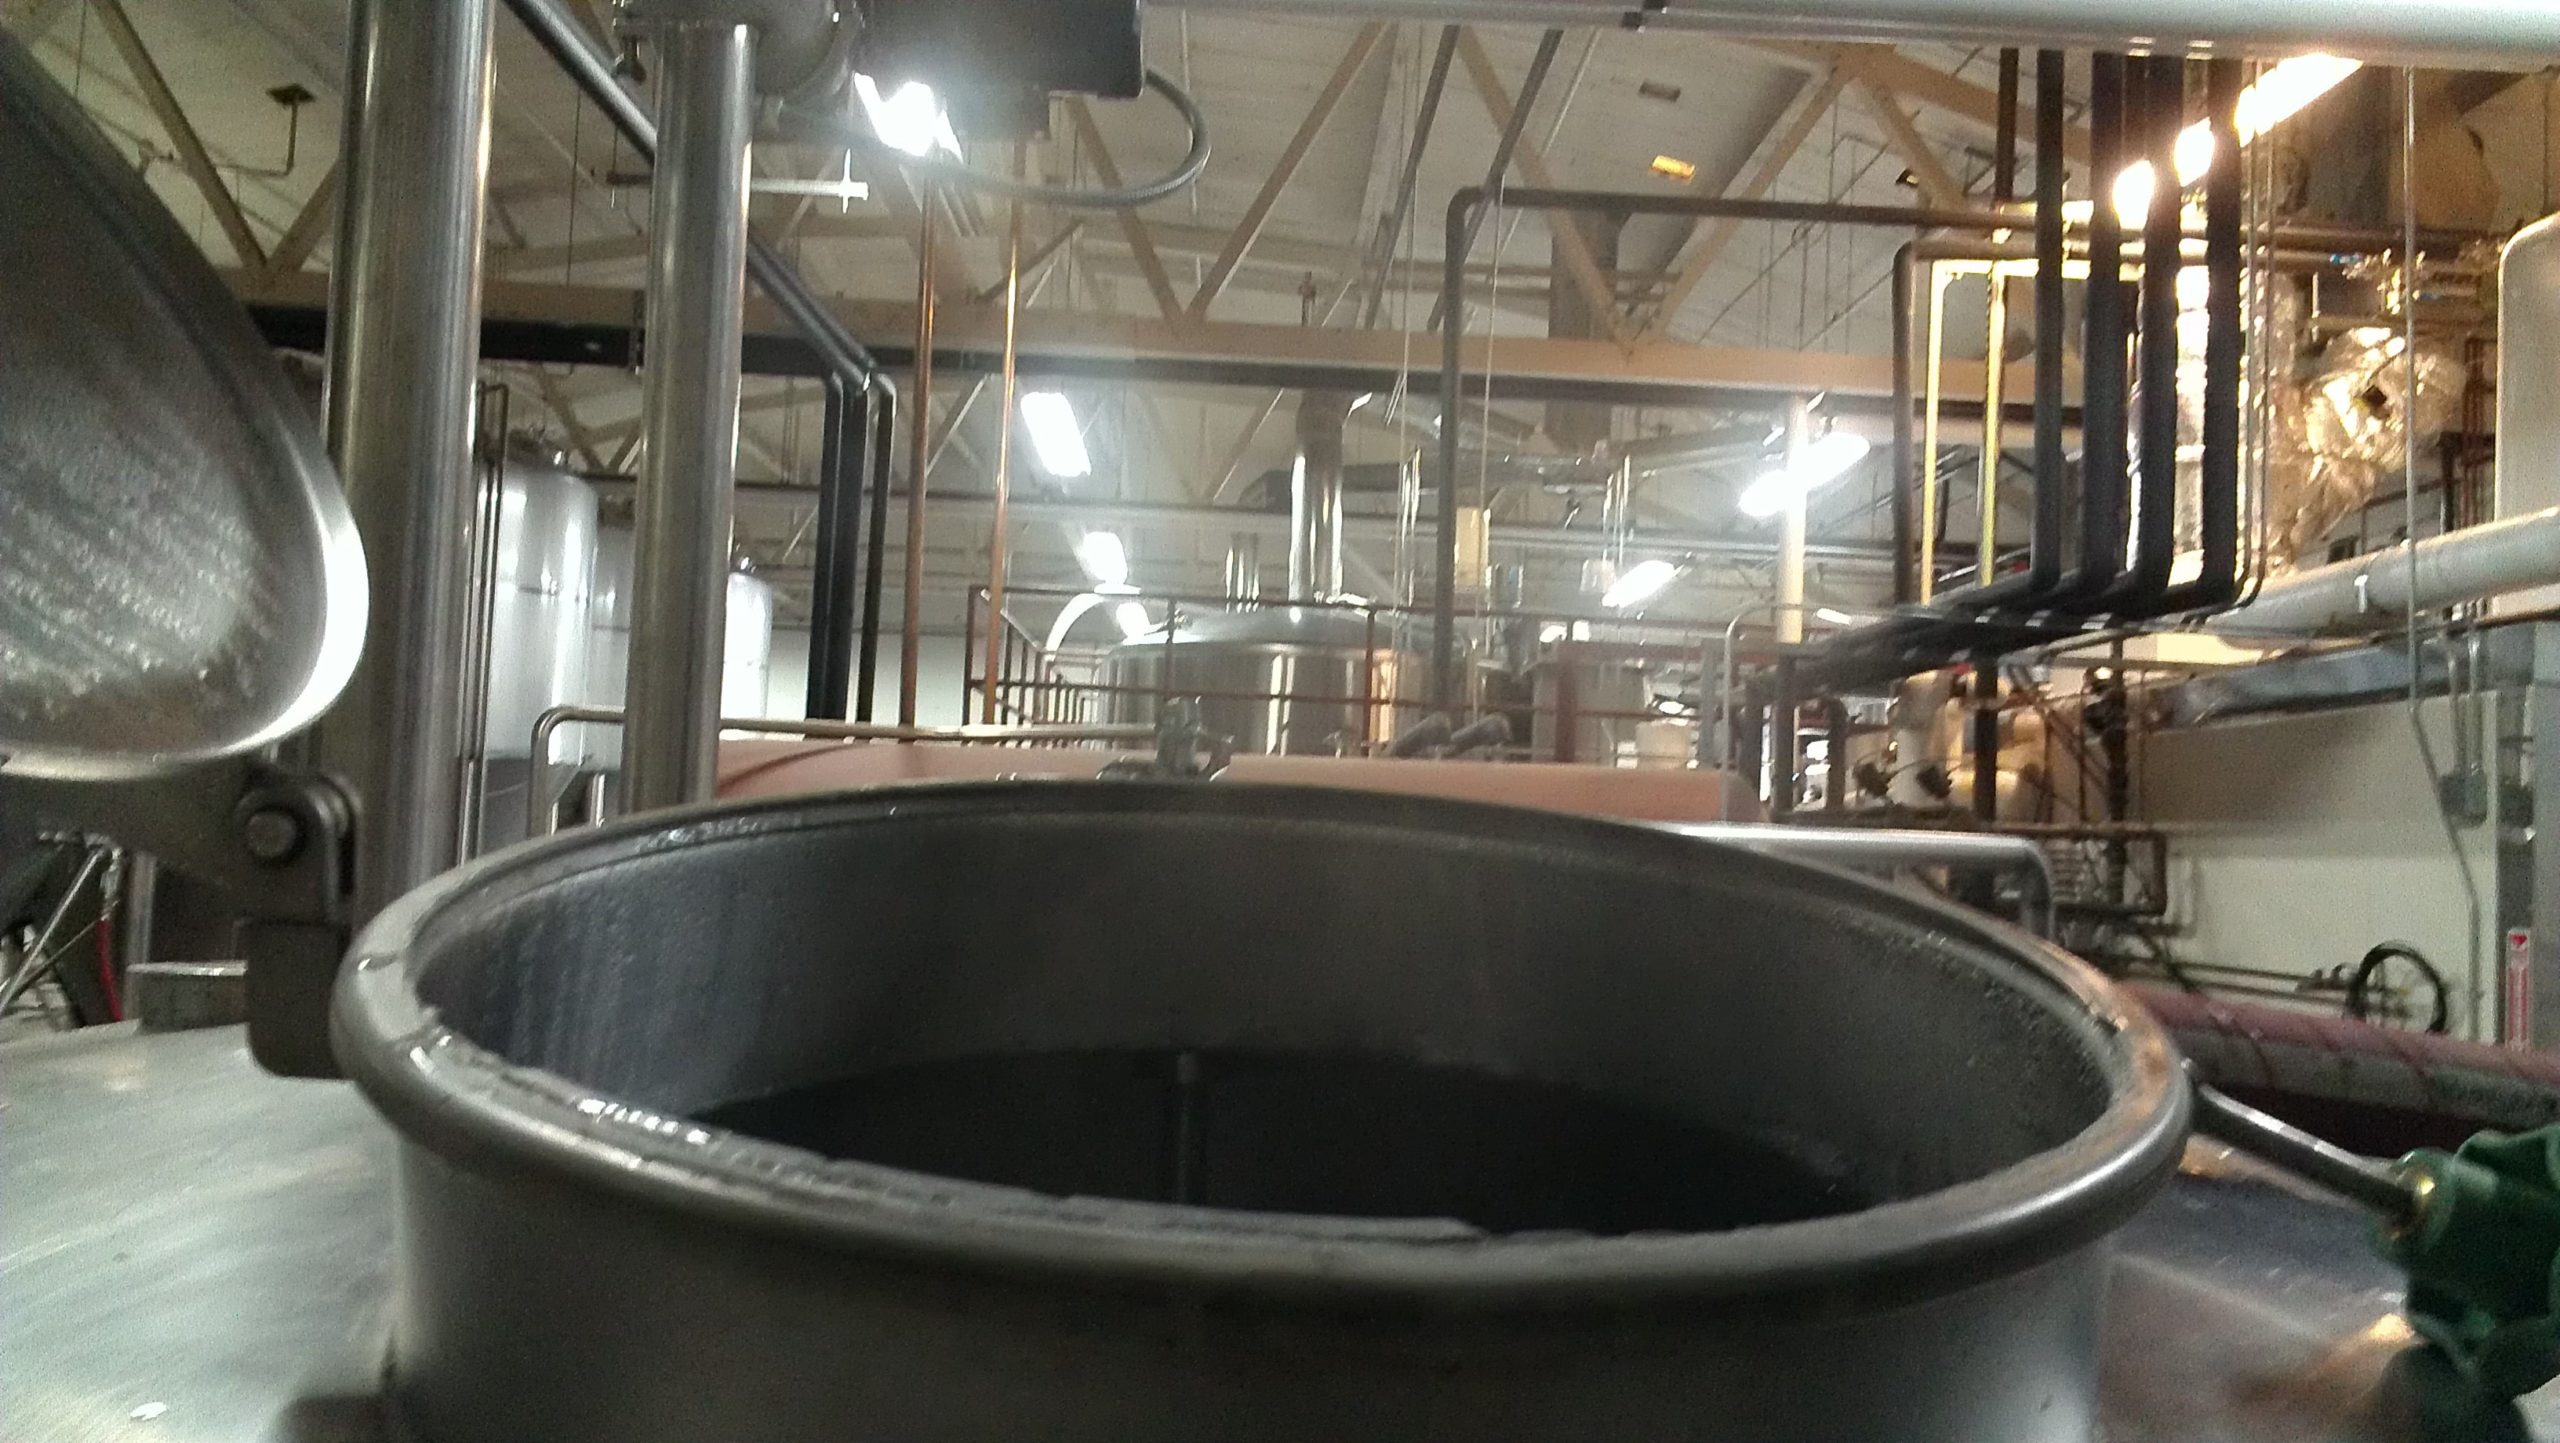 Looking over the mash tun manway at the 65BBL big system.